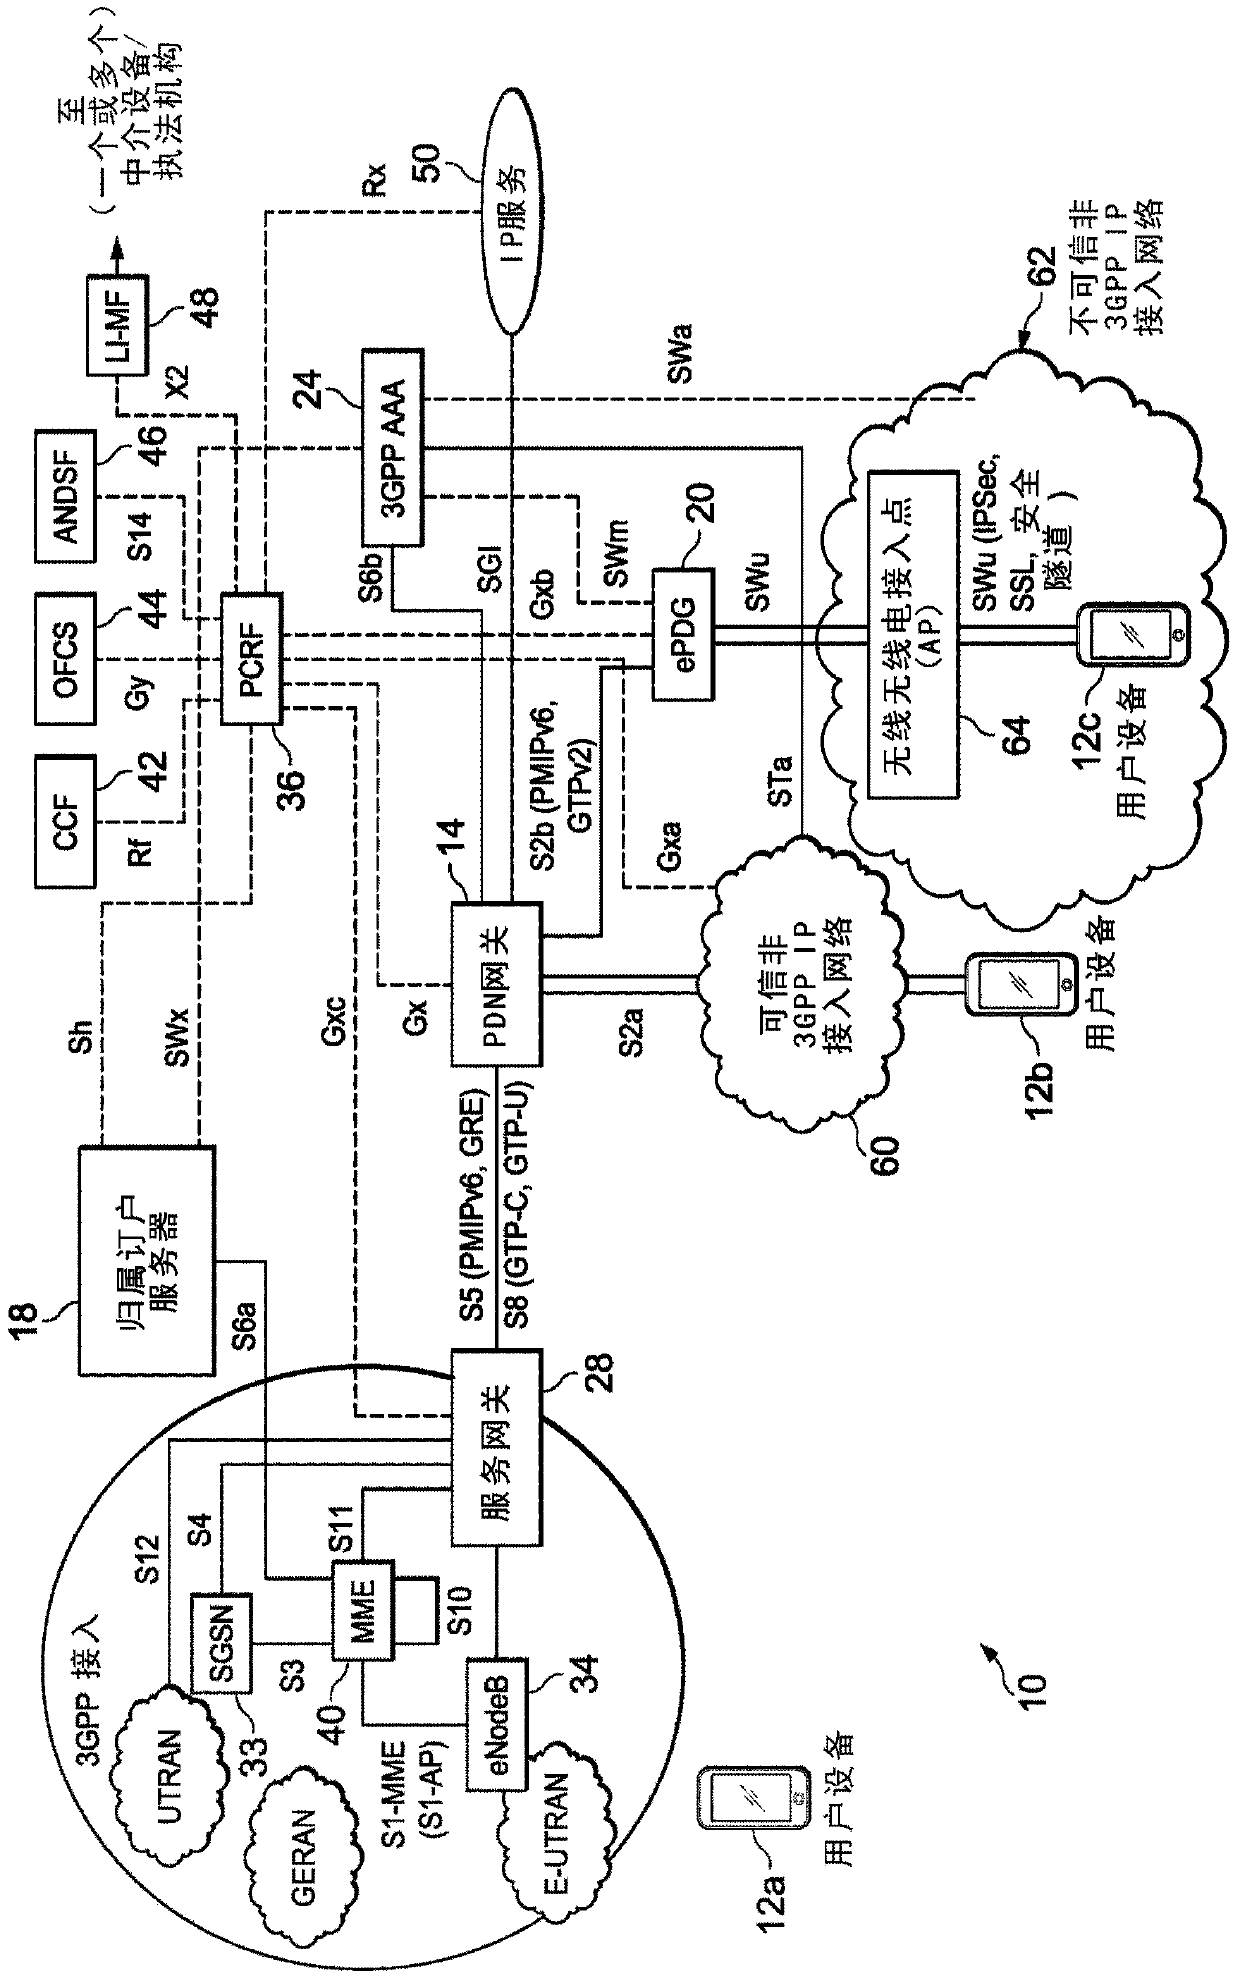 System and method for location reporting in an untrusted network environment